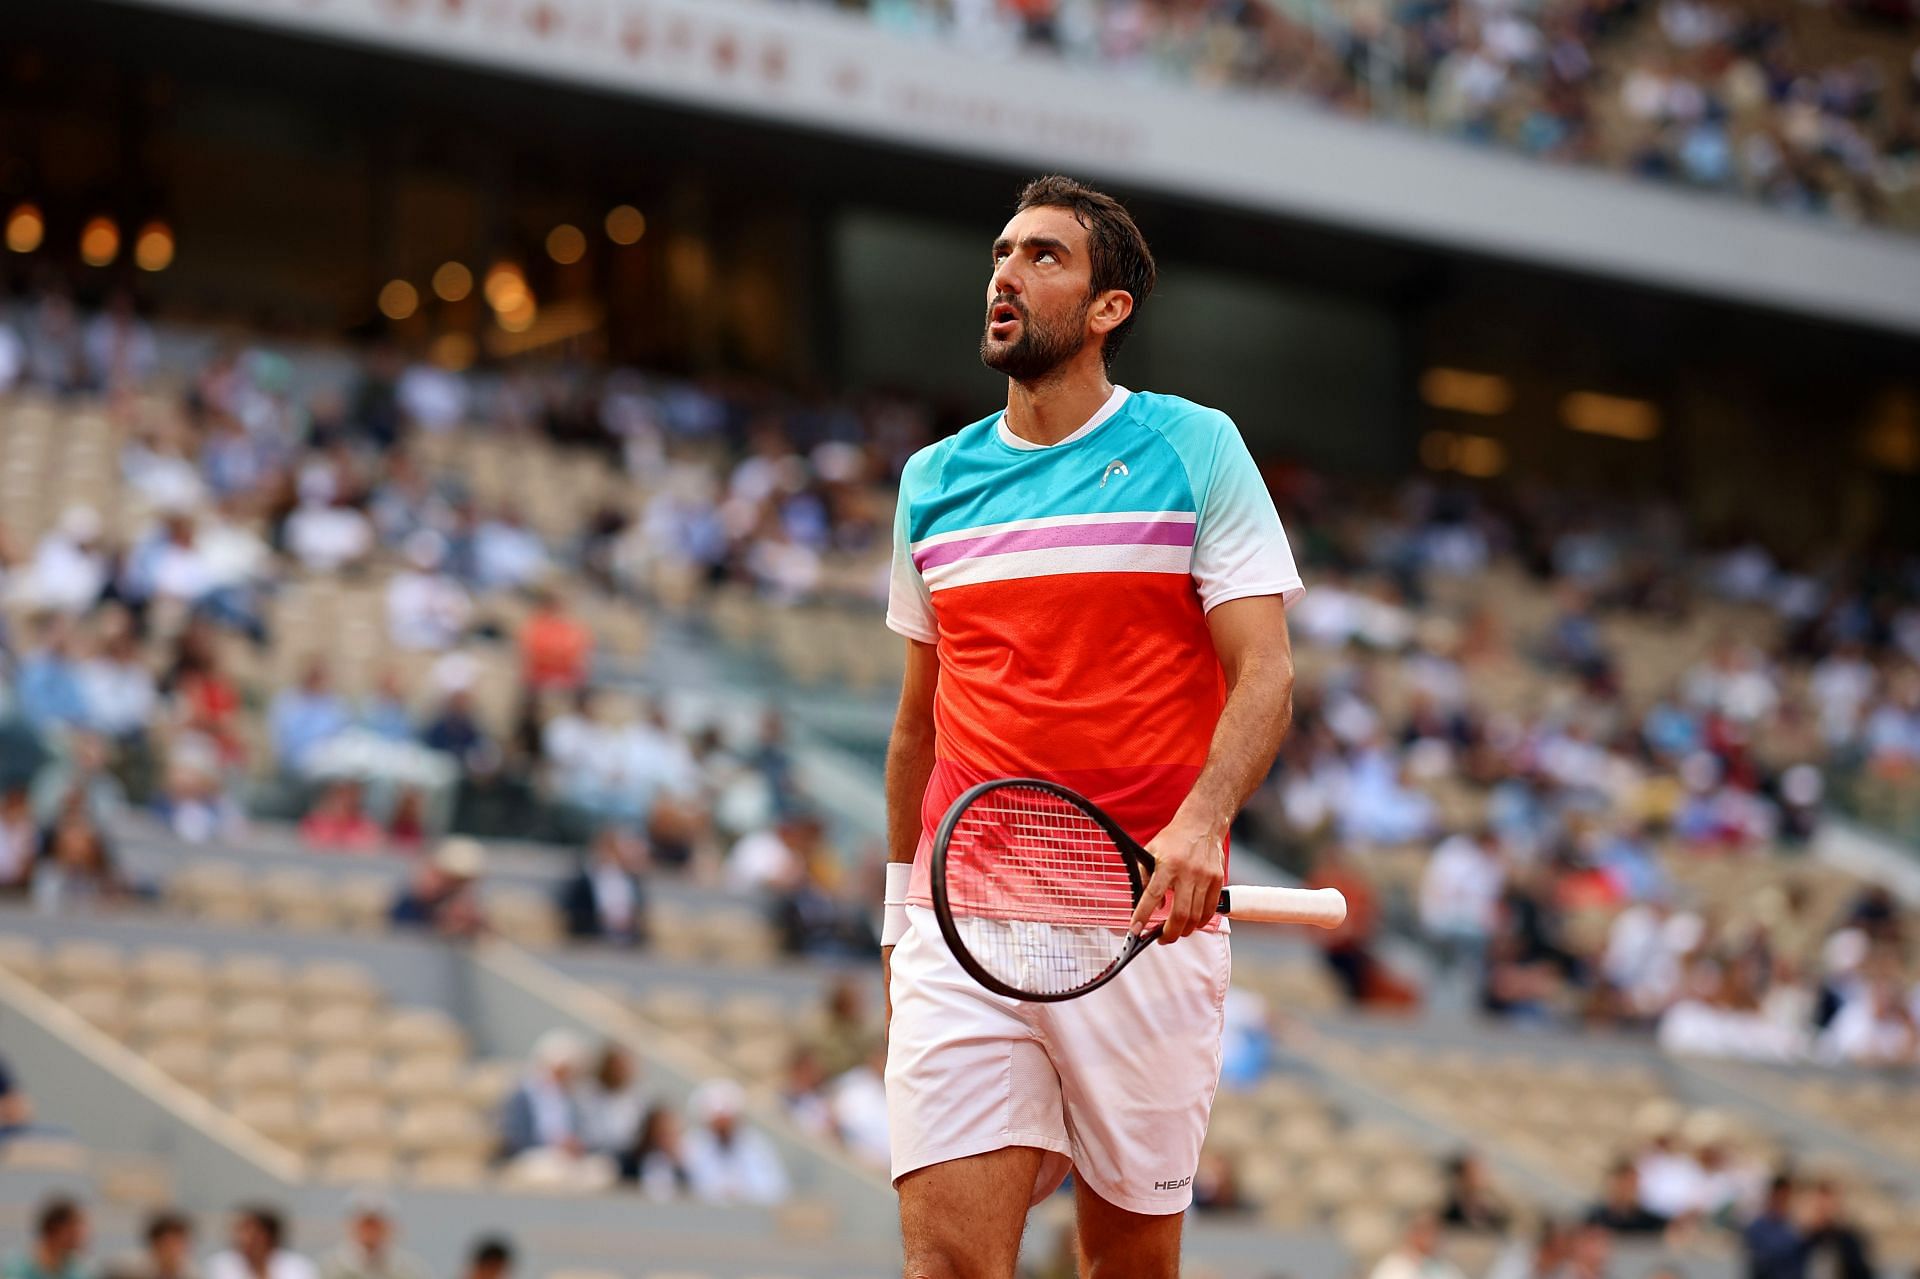 Marin Cilic has withdrawn fromm Wimbledon after testing positive for COVID-19